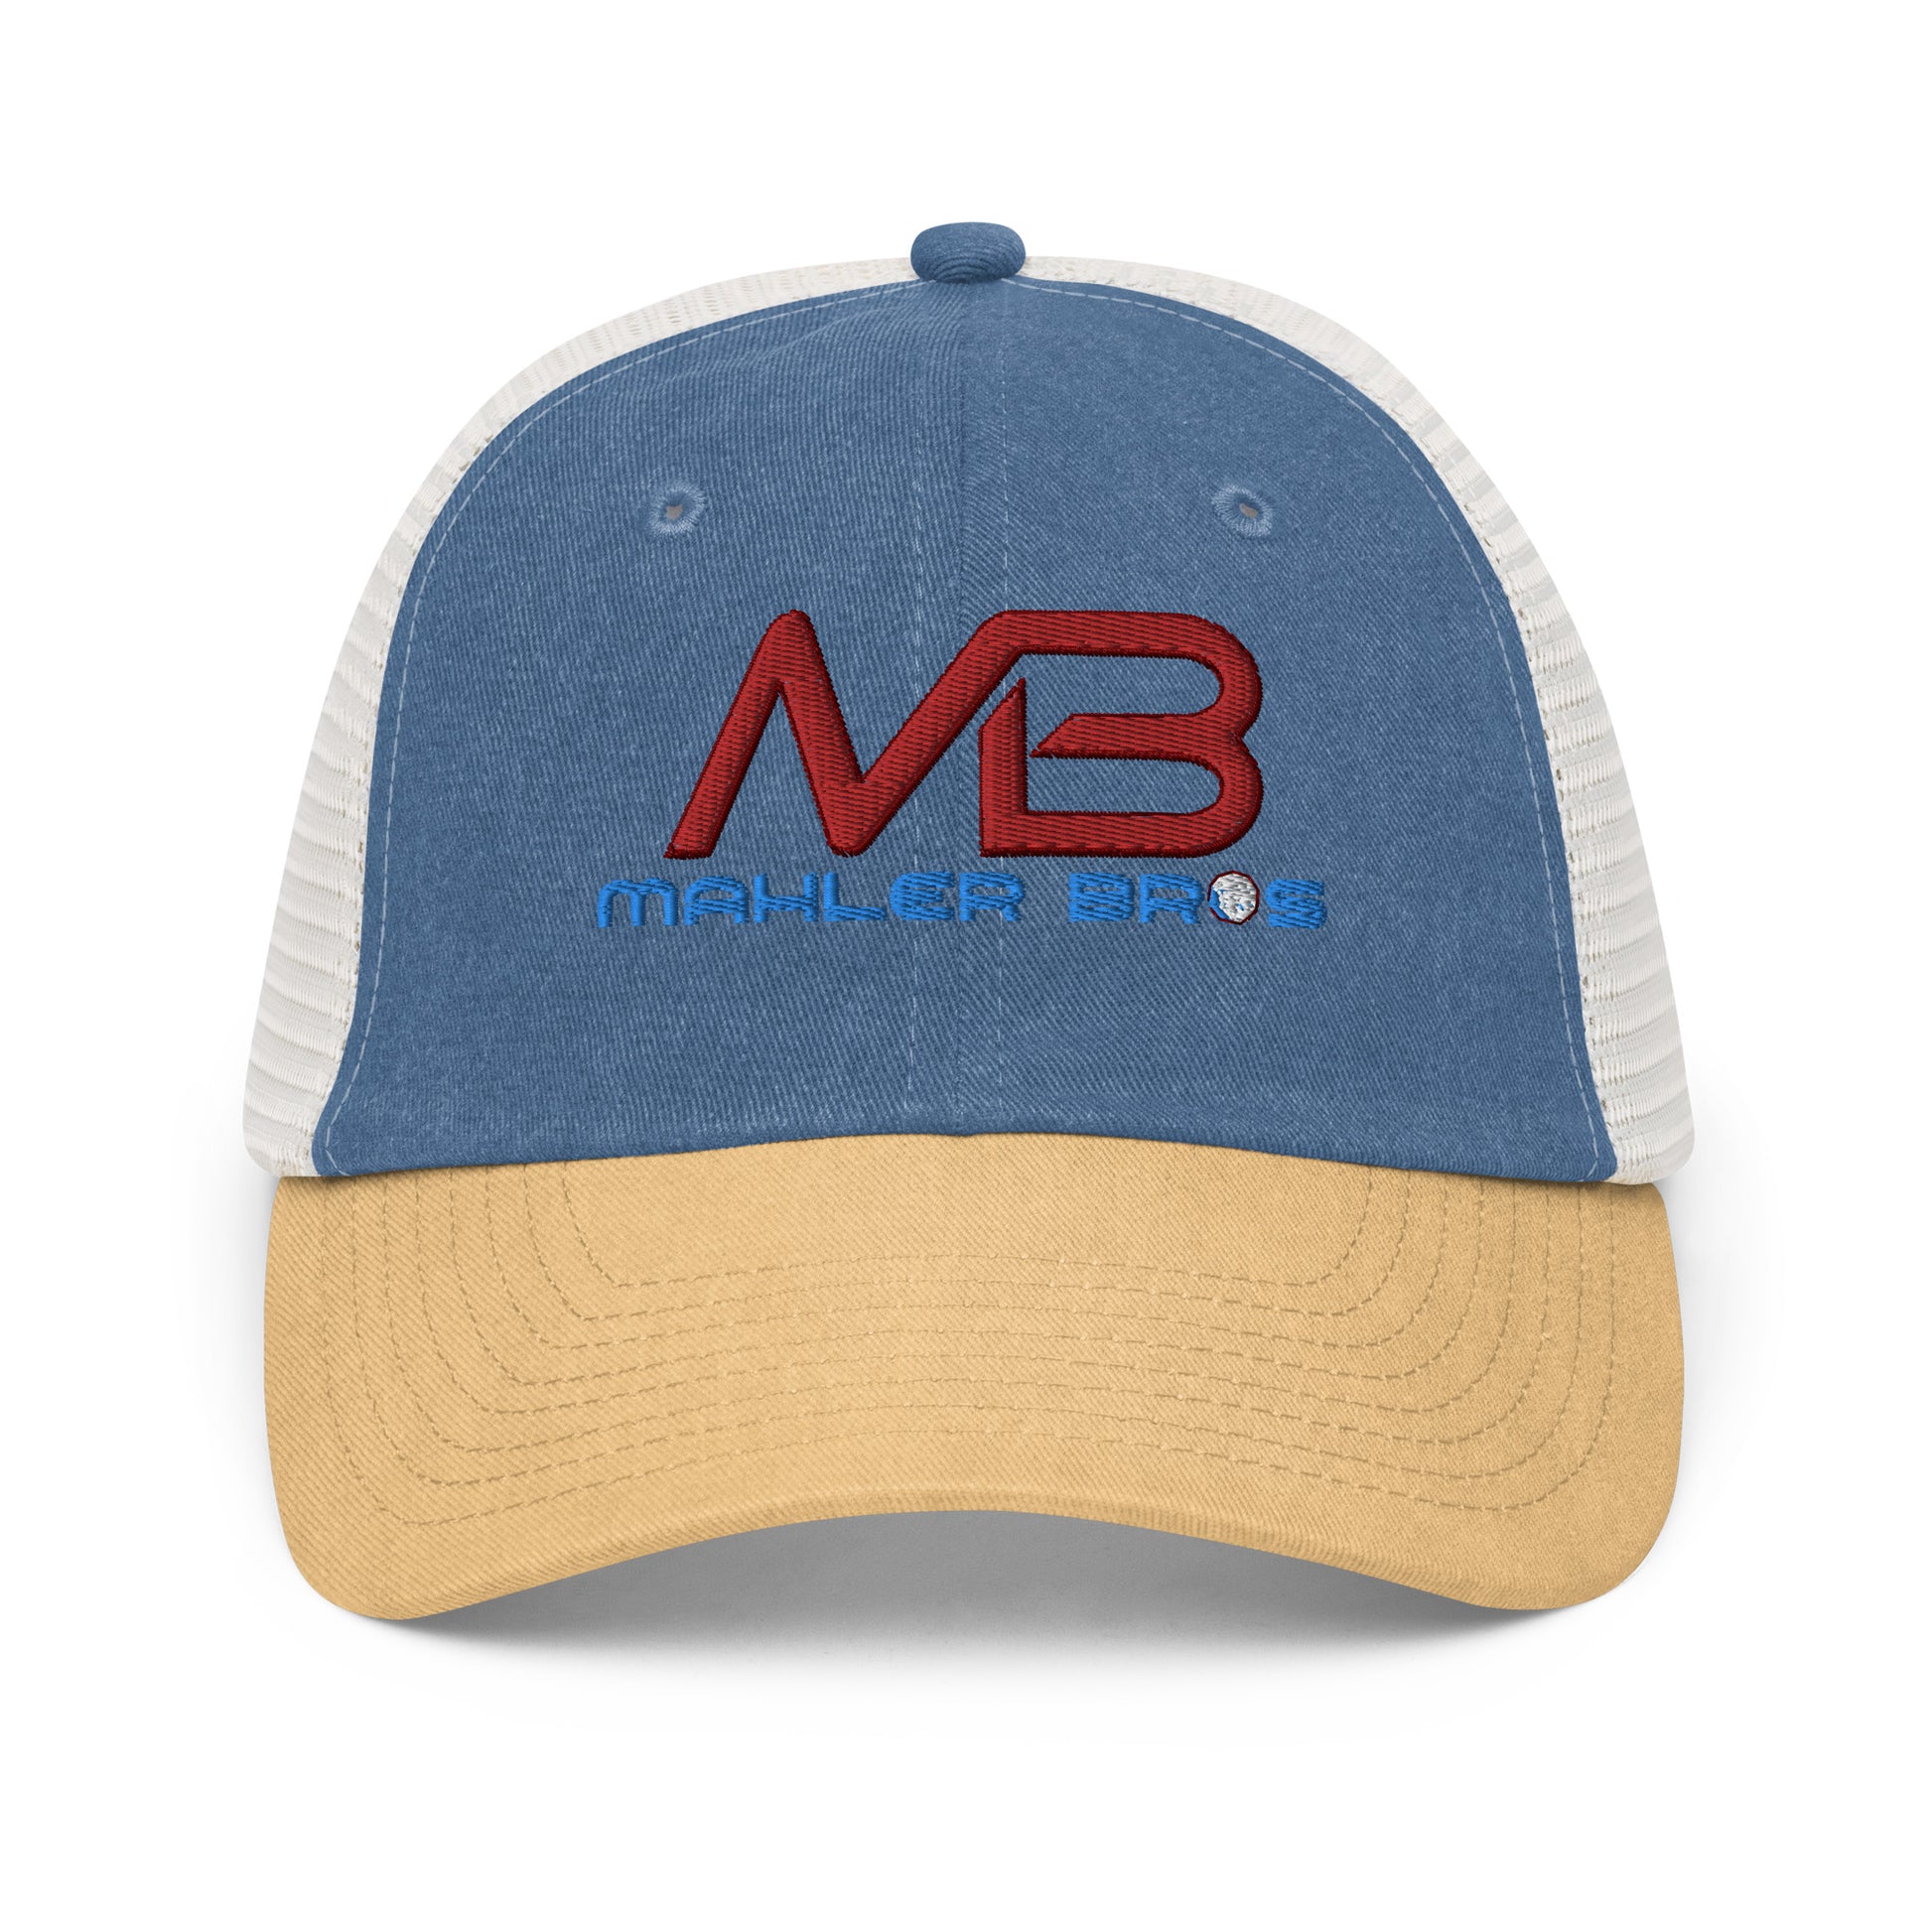 Mahler Bros Embroidered Pigment-dyed cap